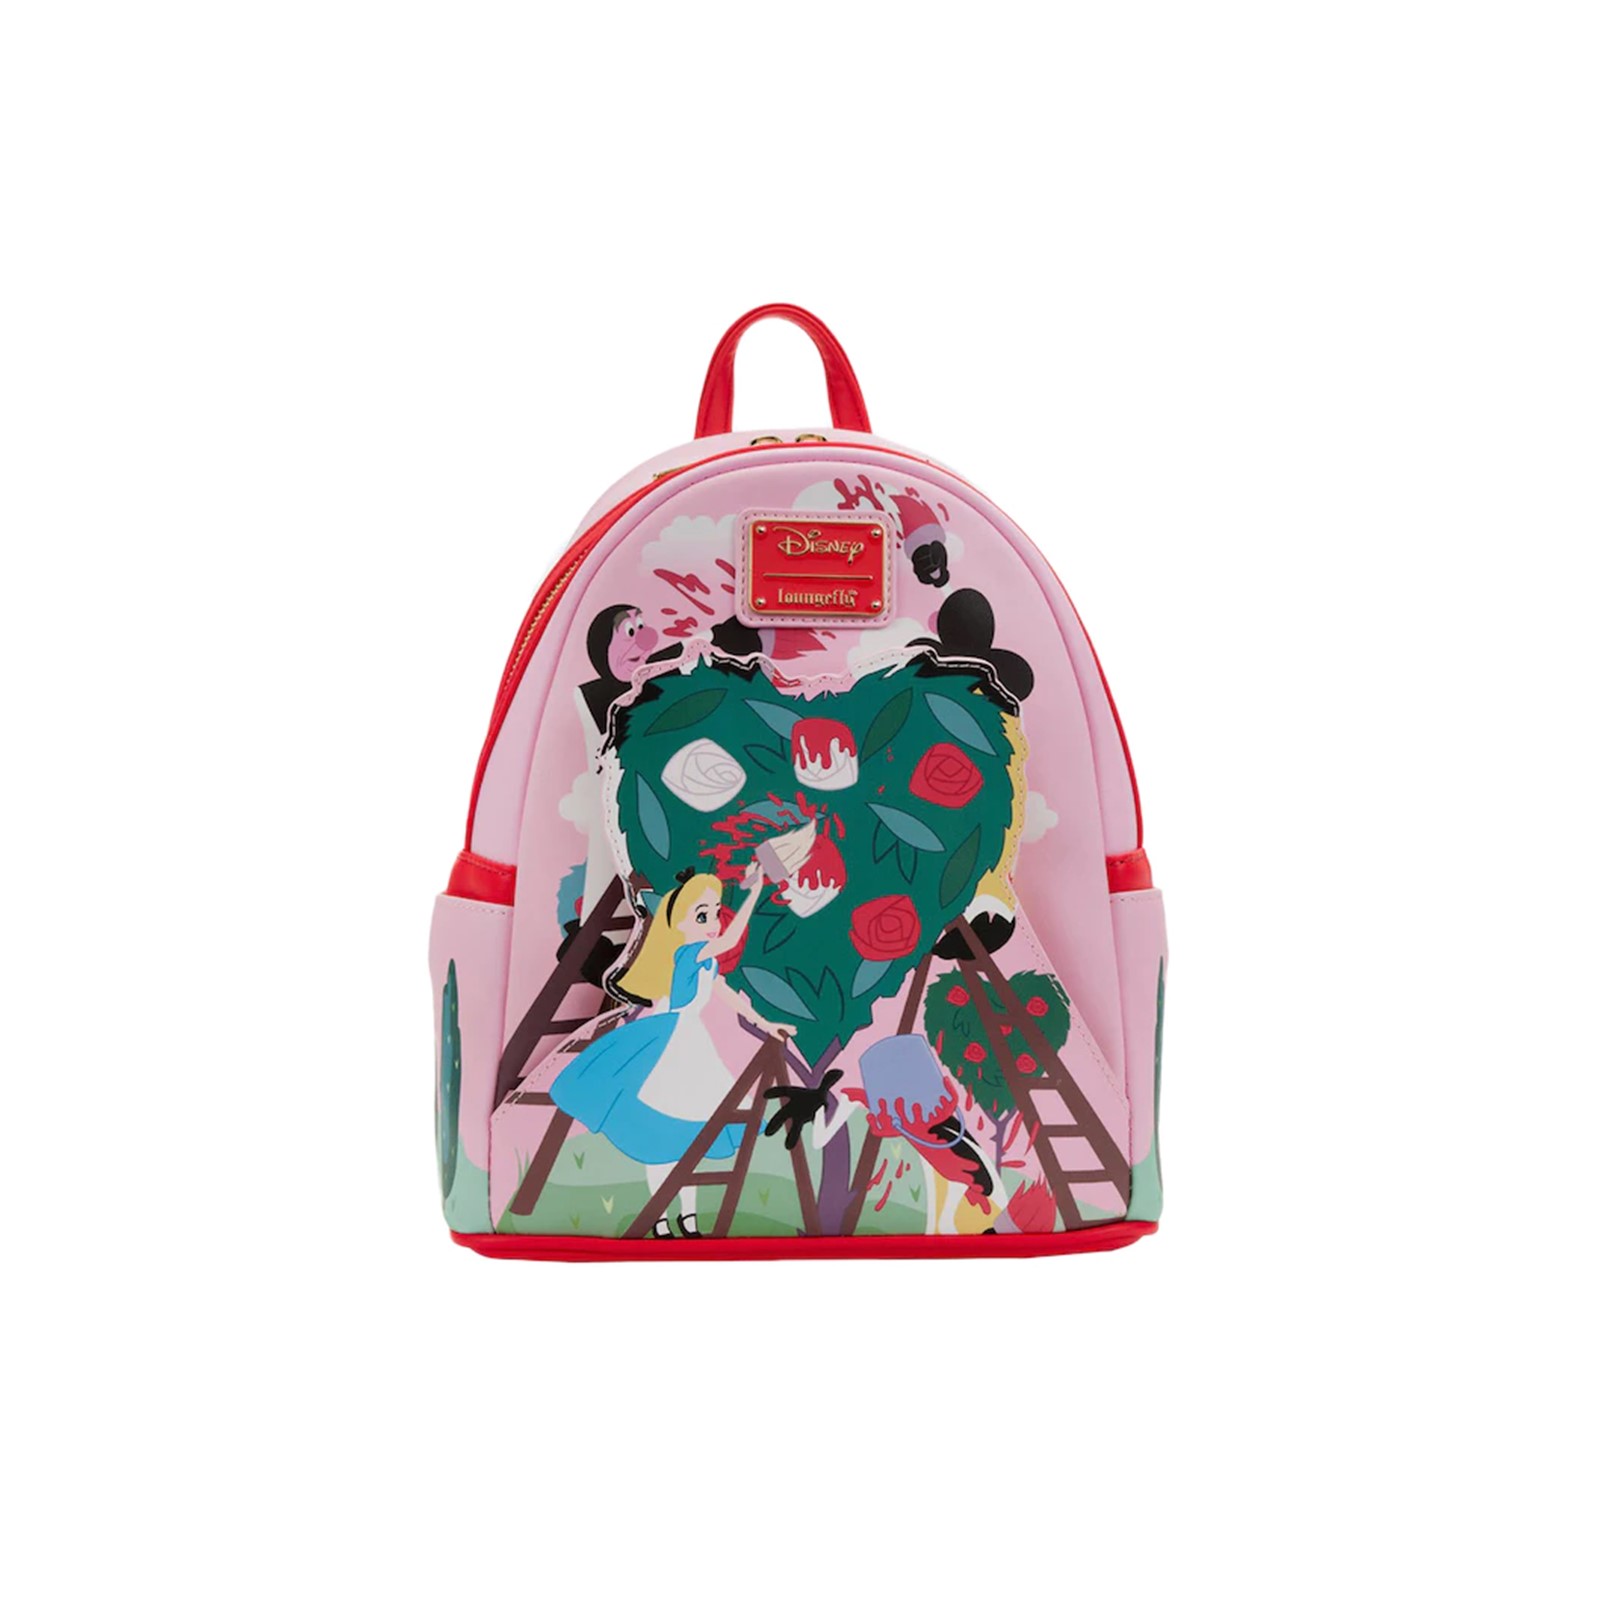 sac a dos loungefly disney Alice au pays des merveilles Painting the roses Red goodin shop